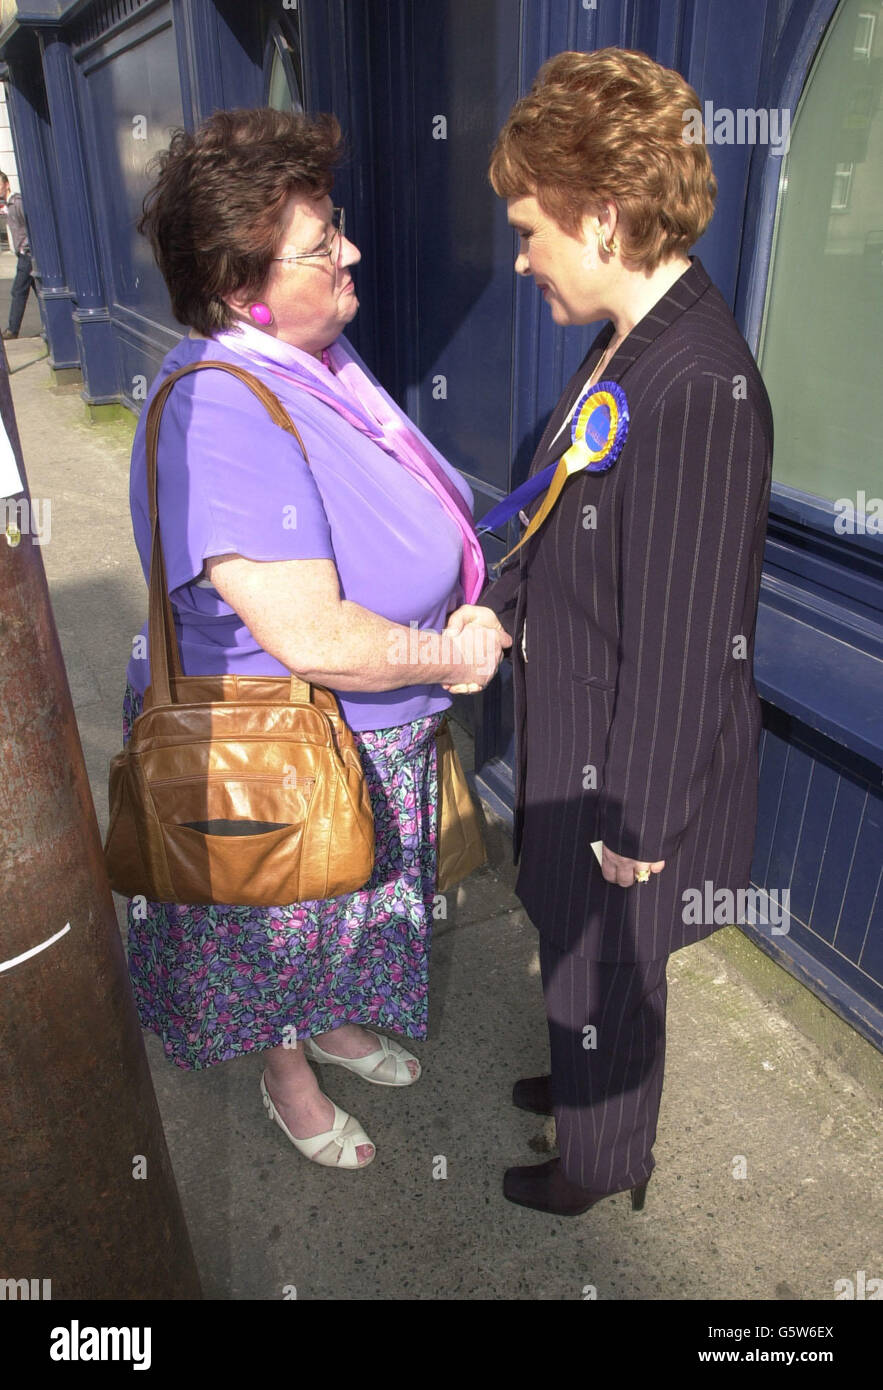 Independent candidate for Galway and former Eurovision Song Contest winner, Dana Rosemary Scallon (right) canvasses for votes in Galway city centre as she prepares for the Irish General Election on 17 May. Stock Photo